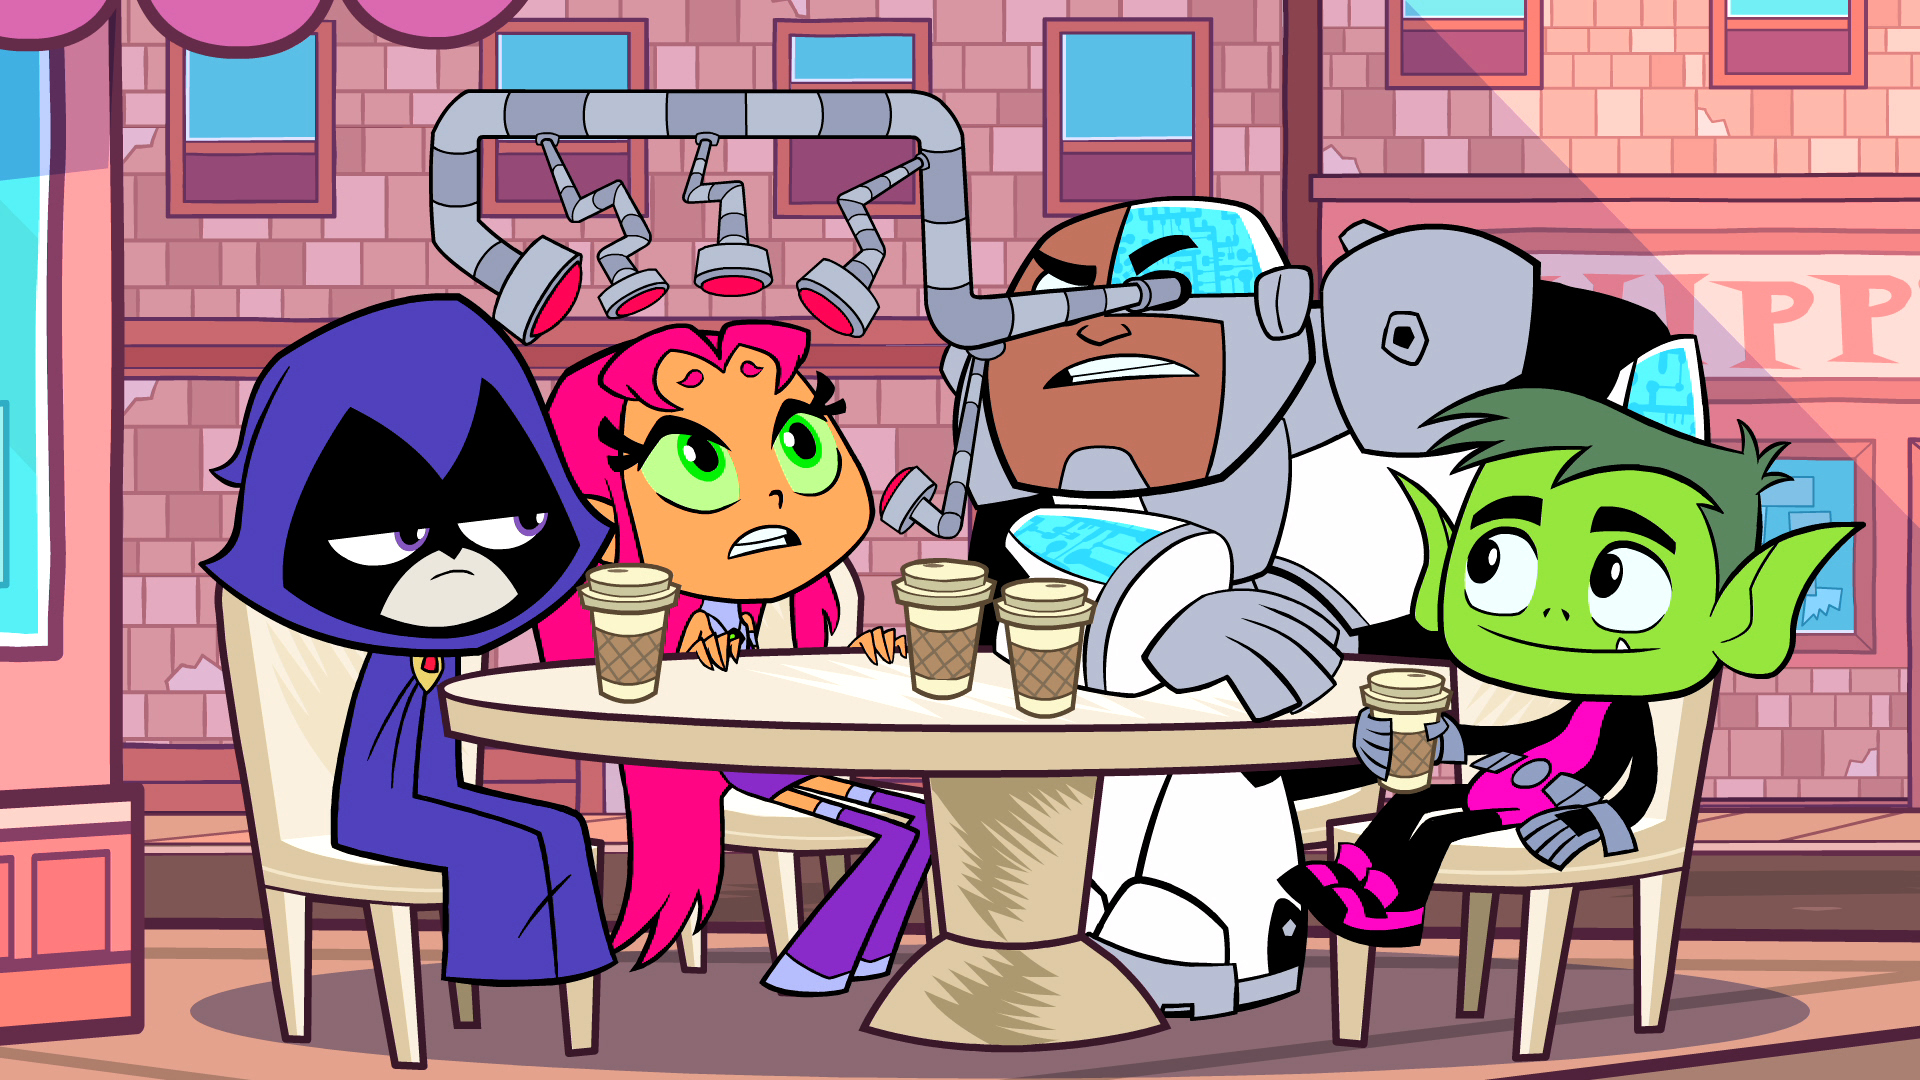 Teen Titans wallpapers and images - wallpapers, pictures, photos